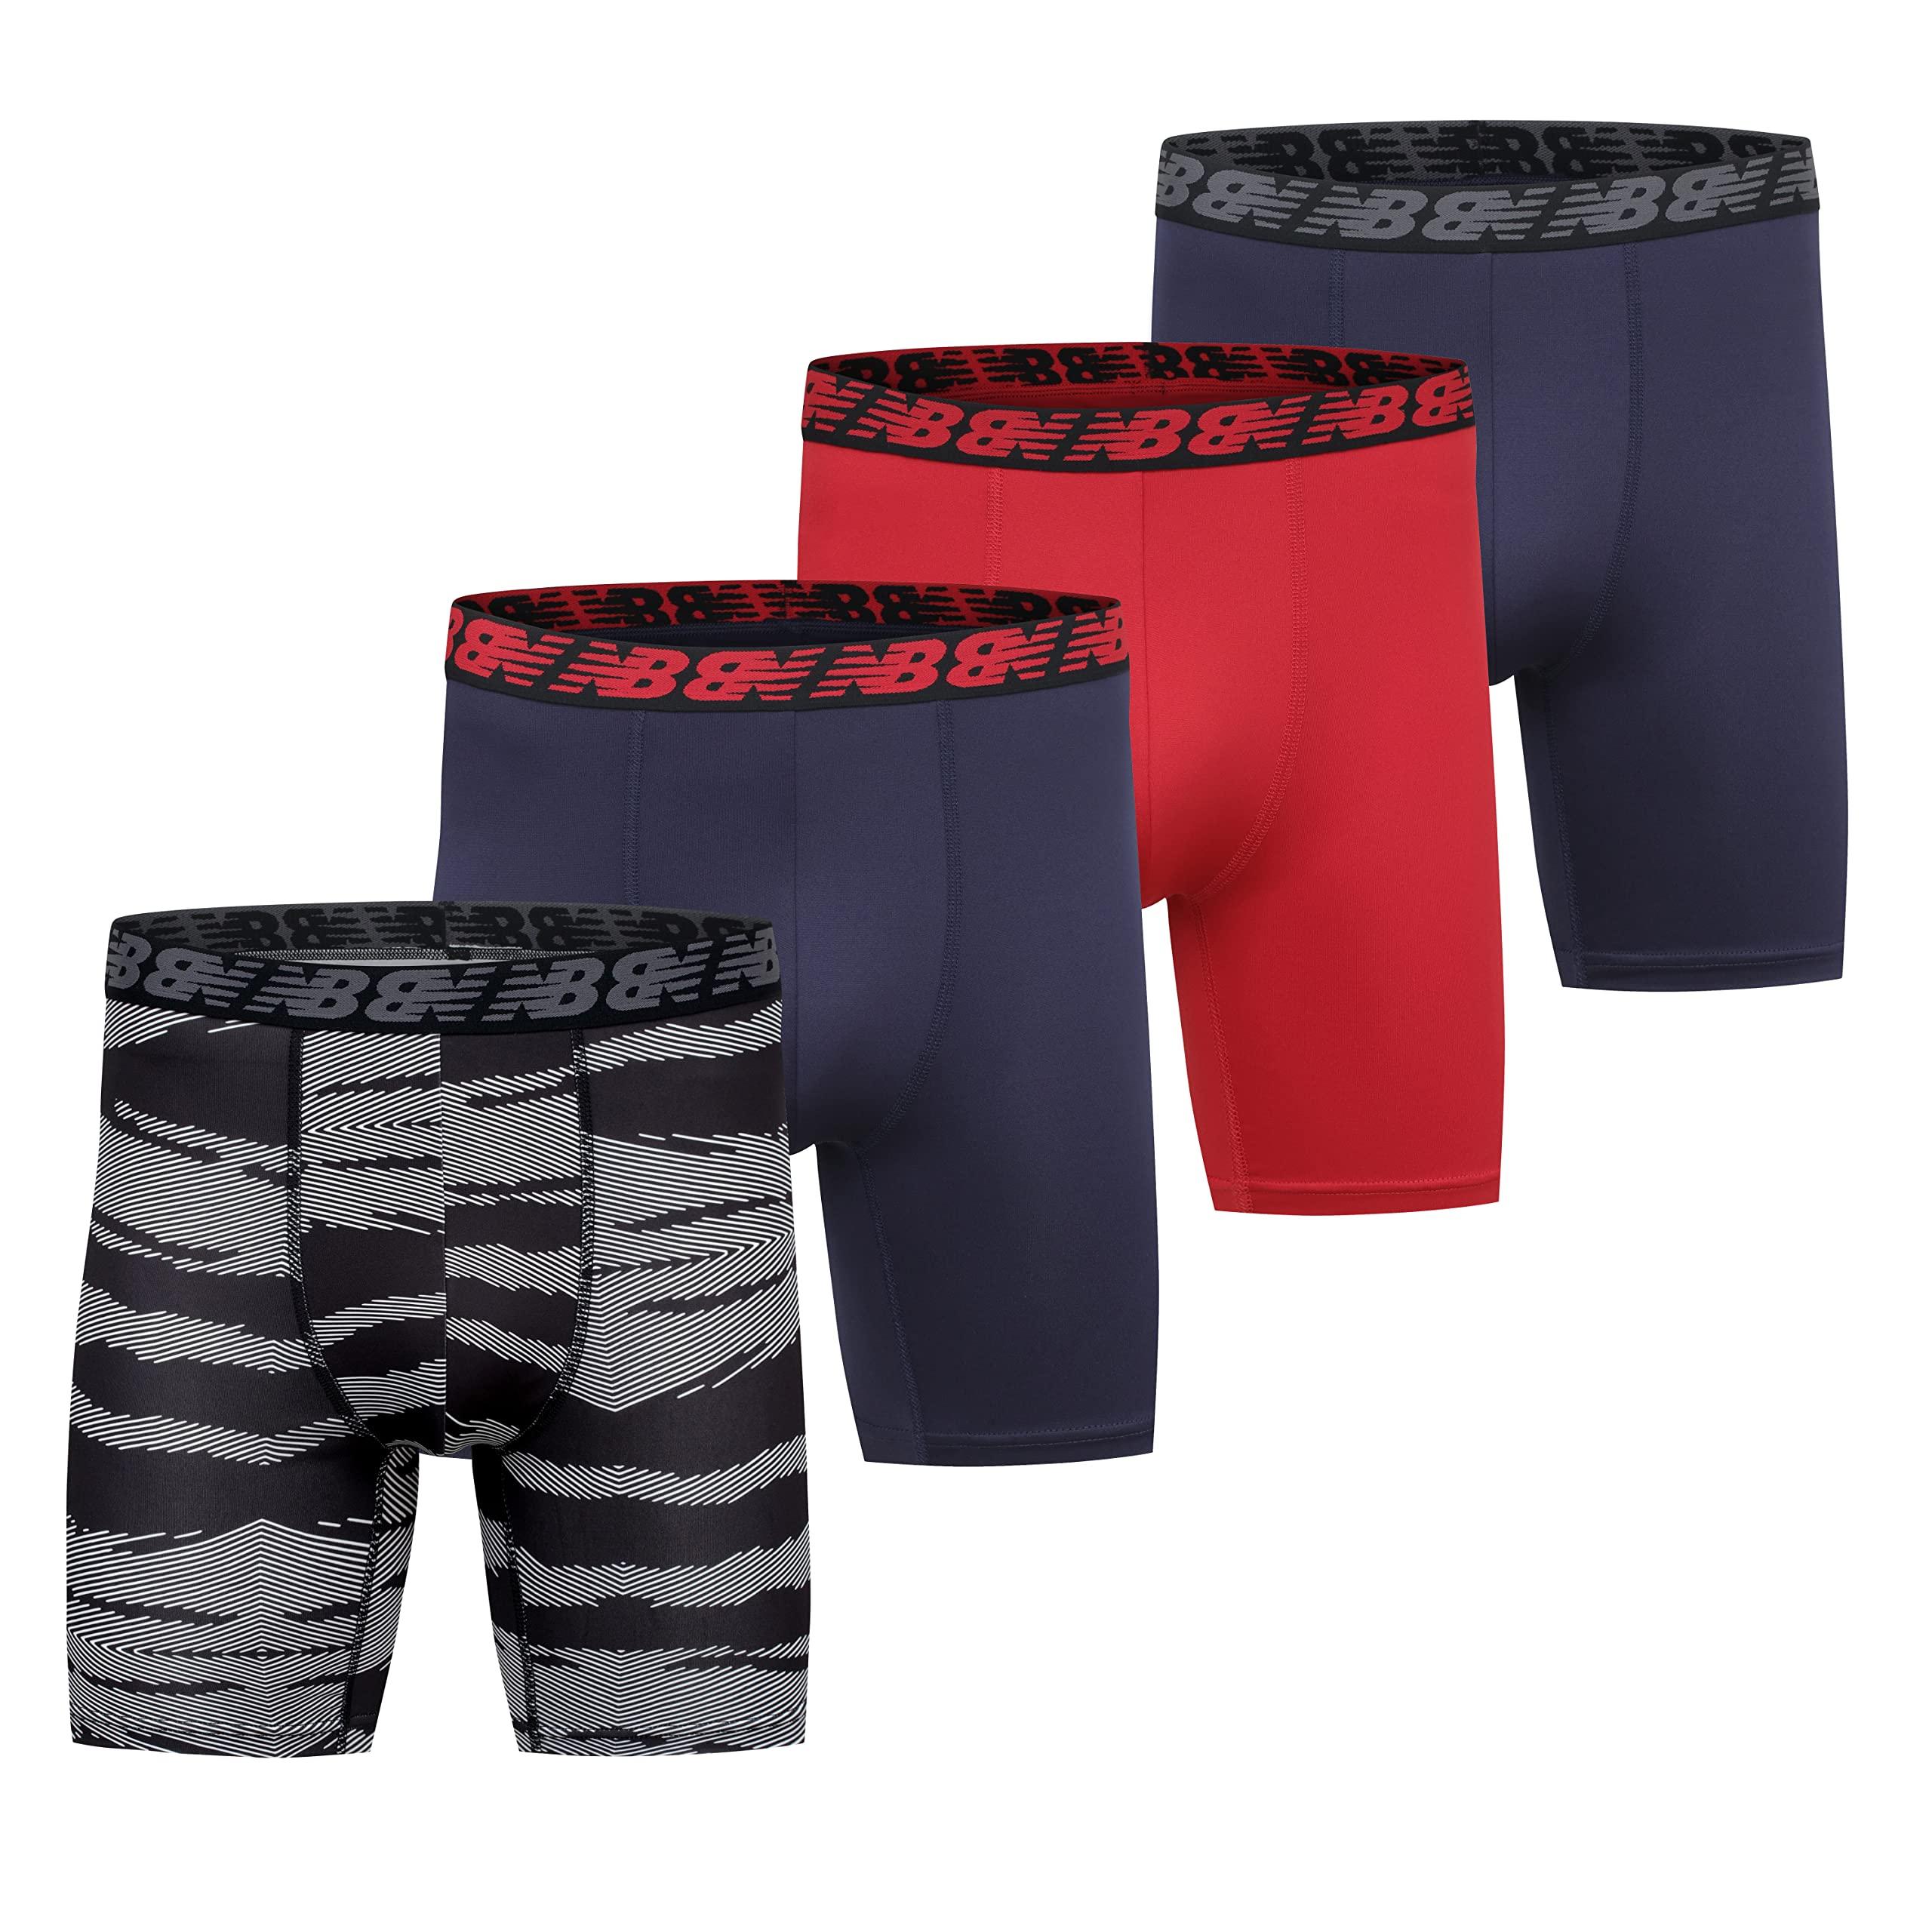 New Balance Standard 5 Performance No Fly Boxer Brief in Red for